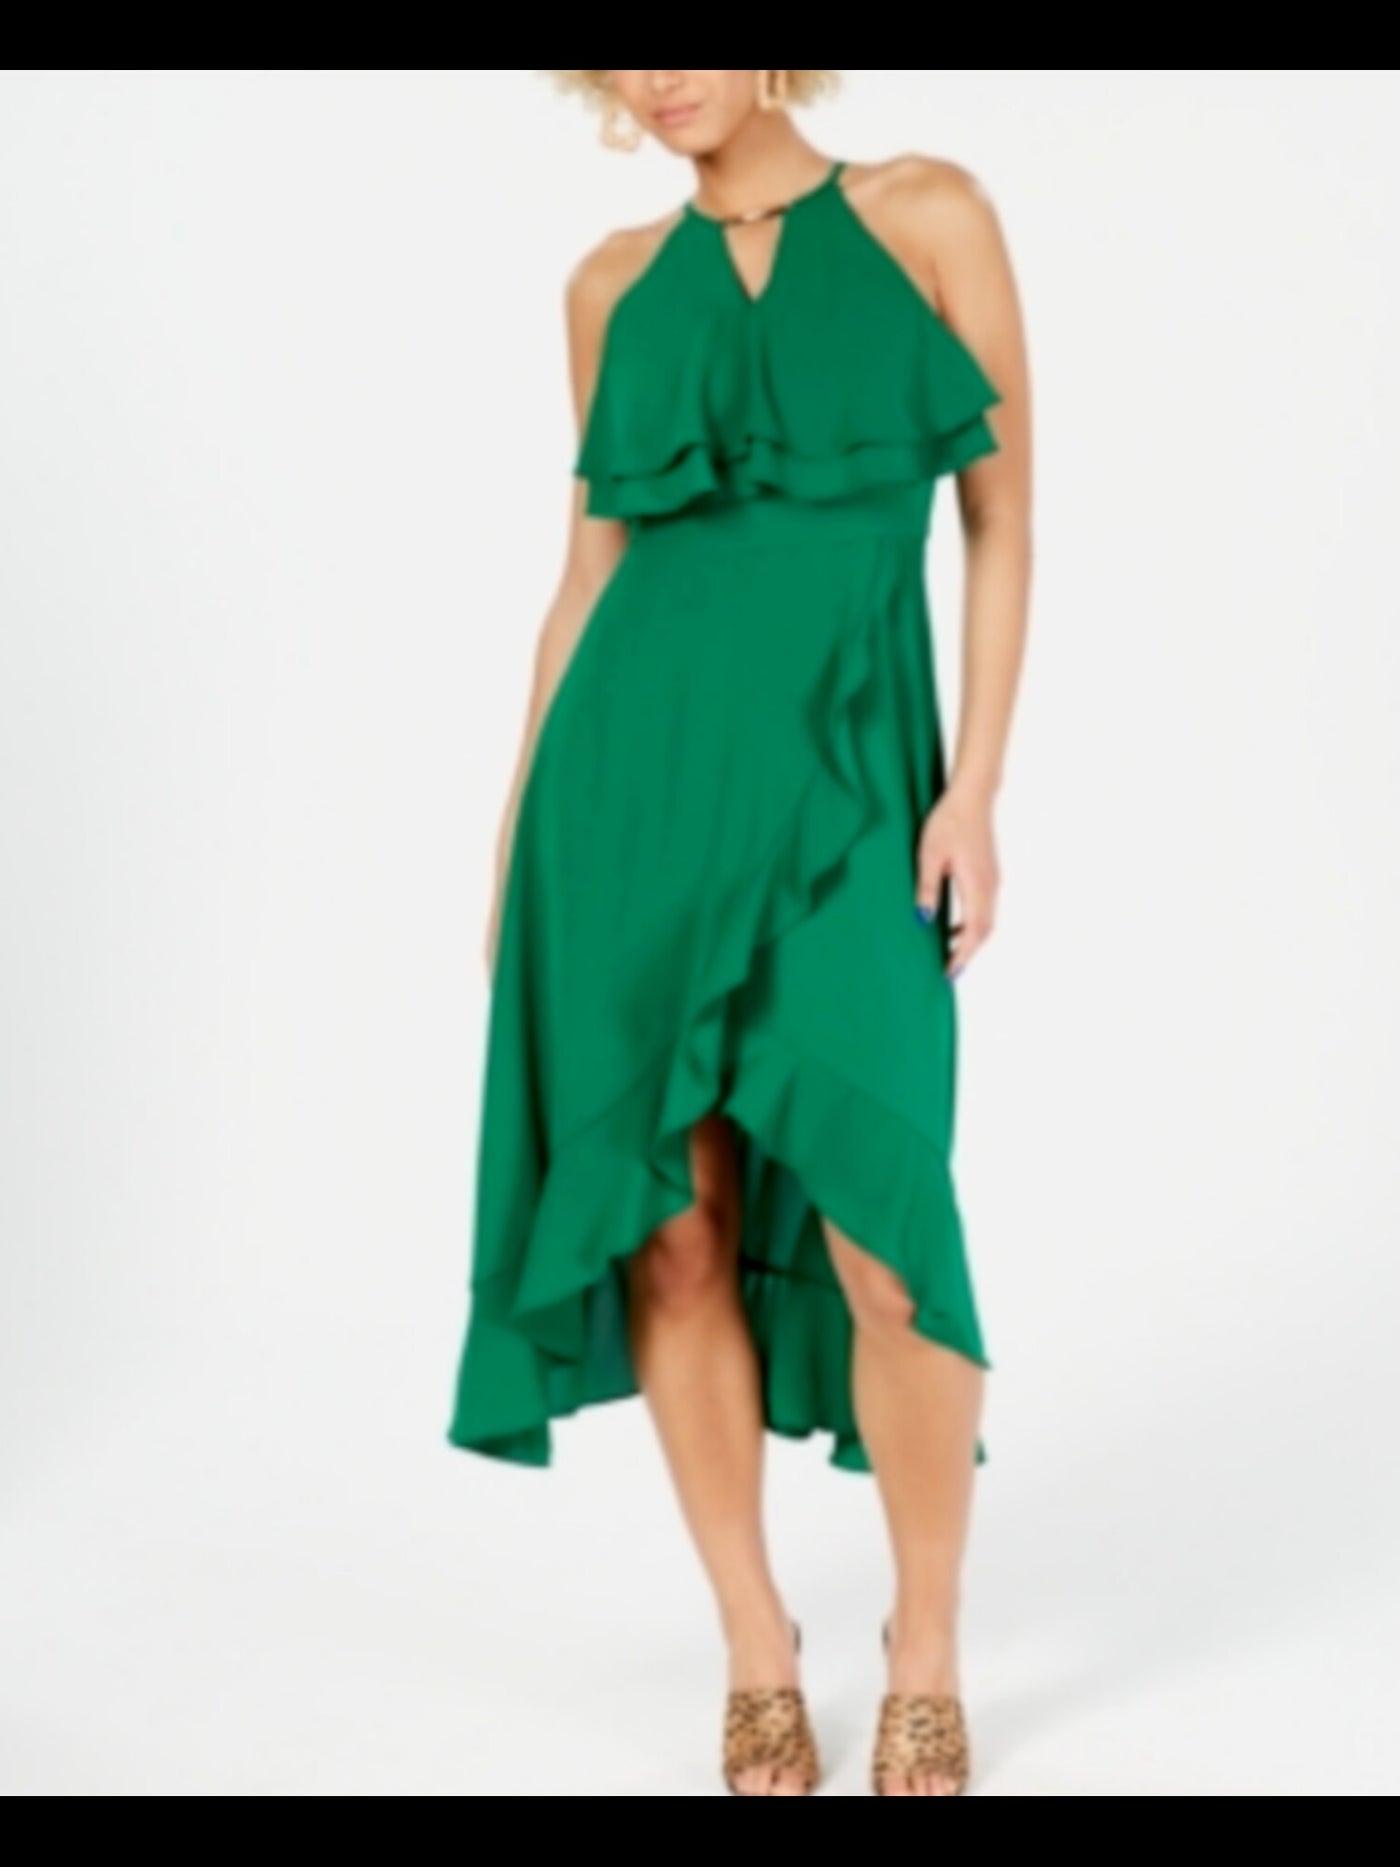 KENSIE DRESSES Womens Green Embellished Ruffled Halter Popover Sleeveless Keyhole Below The Knee Party Fit + Flare Dress 0